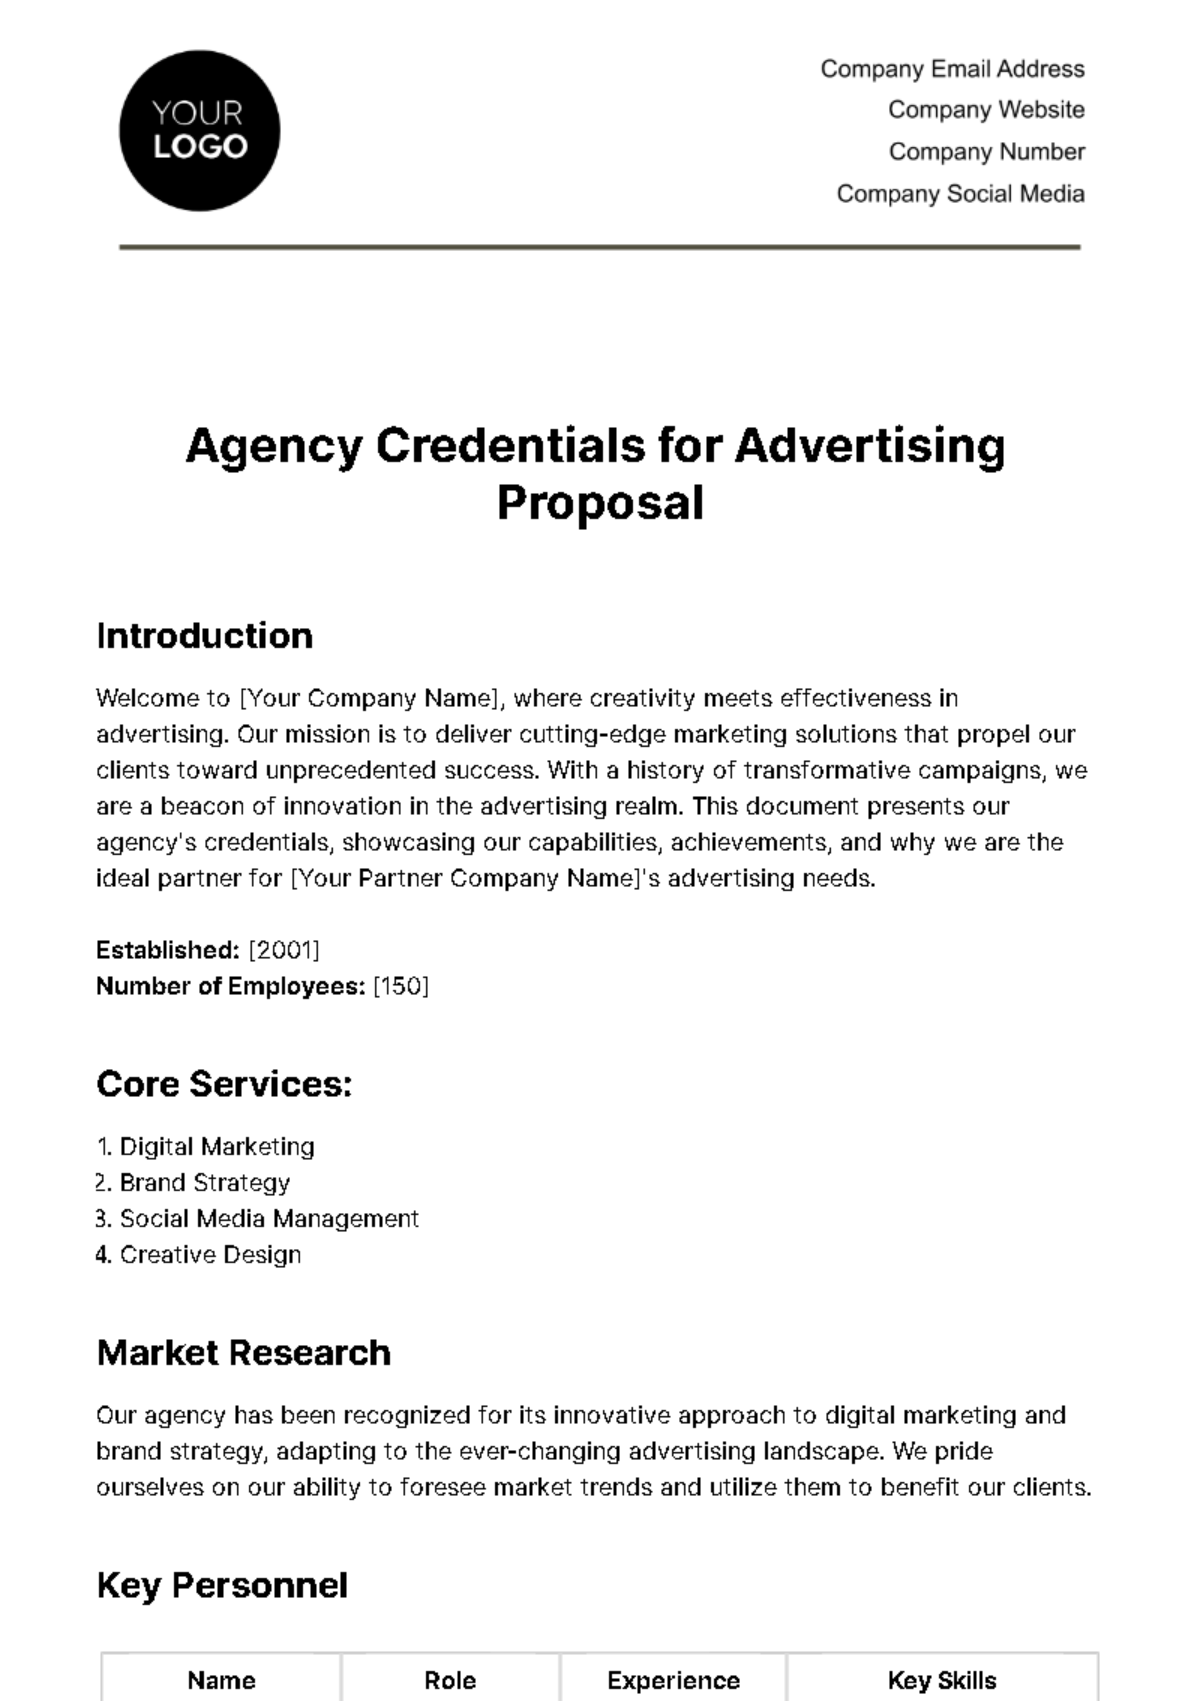 Free Agency Credentials for Advertising Proposals Template